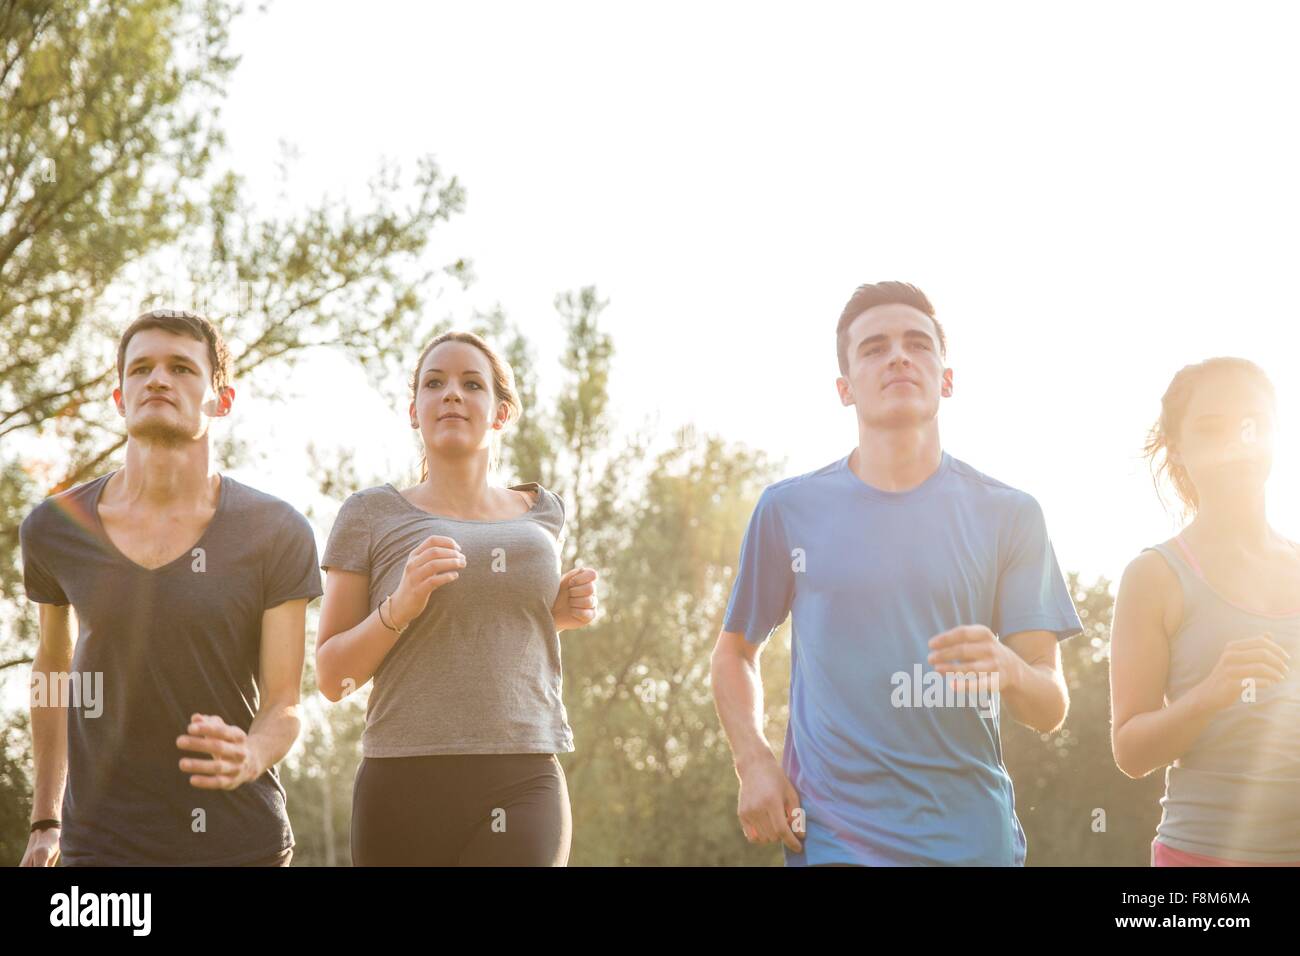 Group of friends running outdoors in rural environment Stock Photo